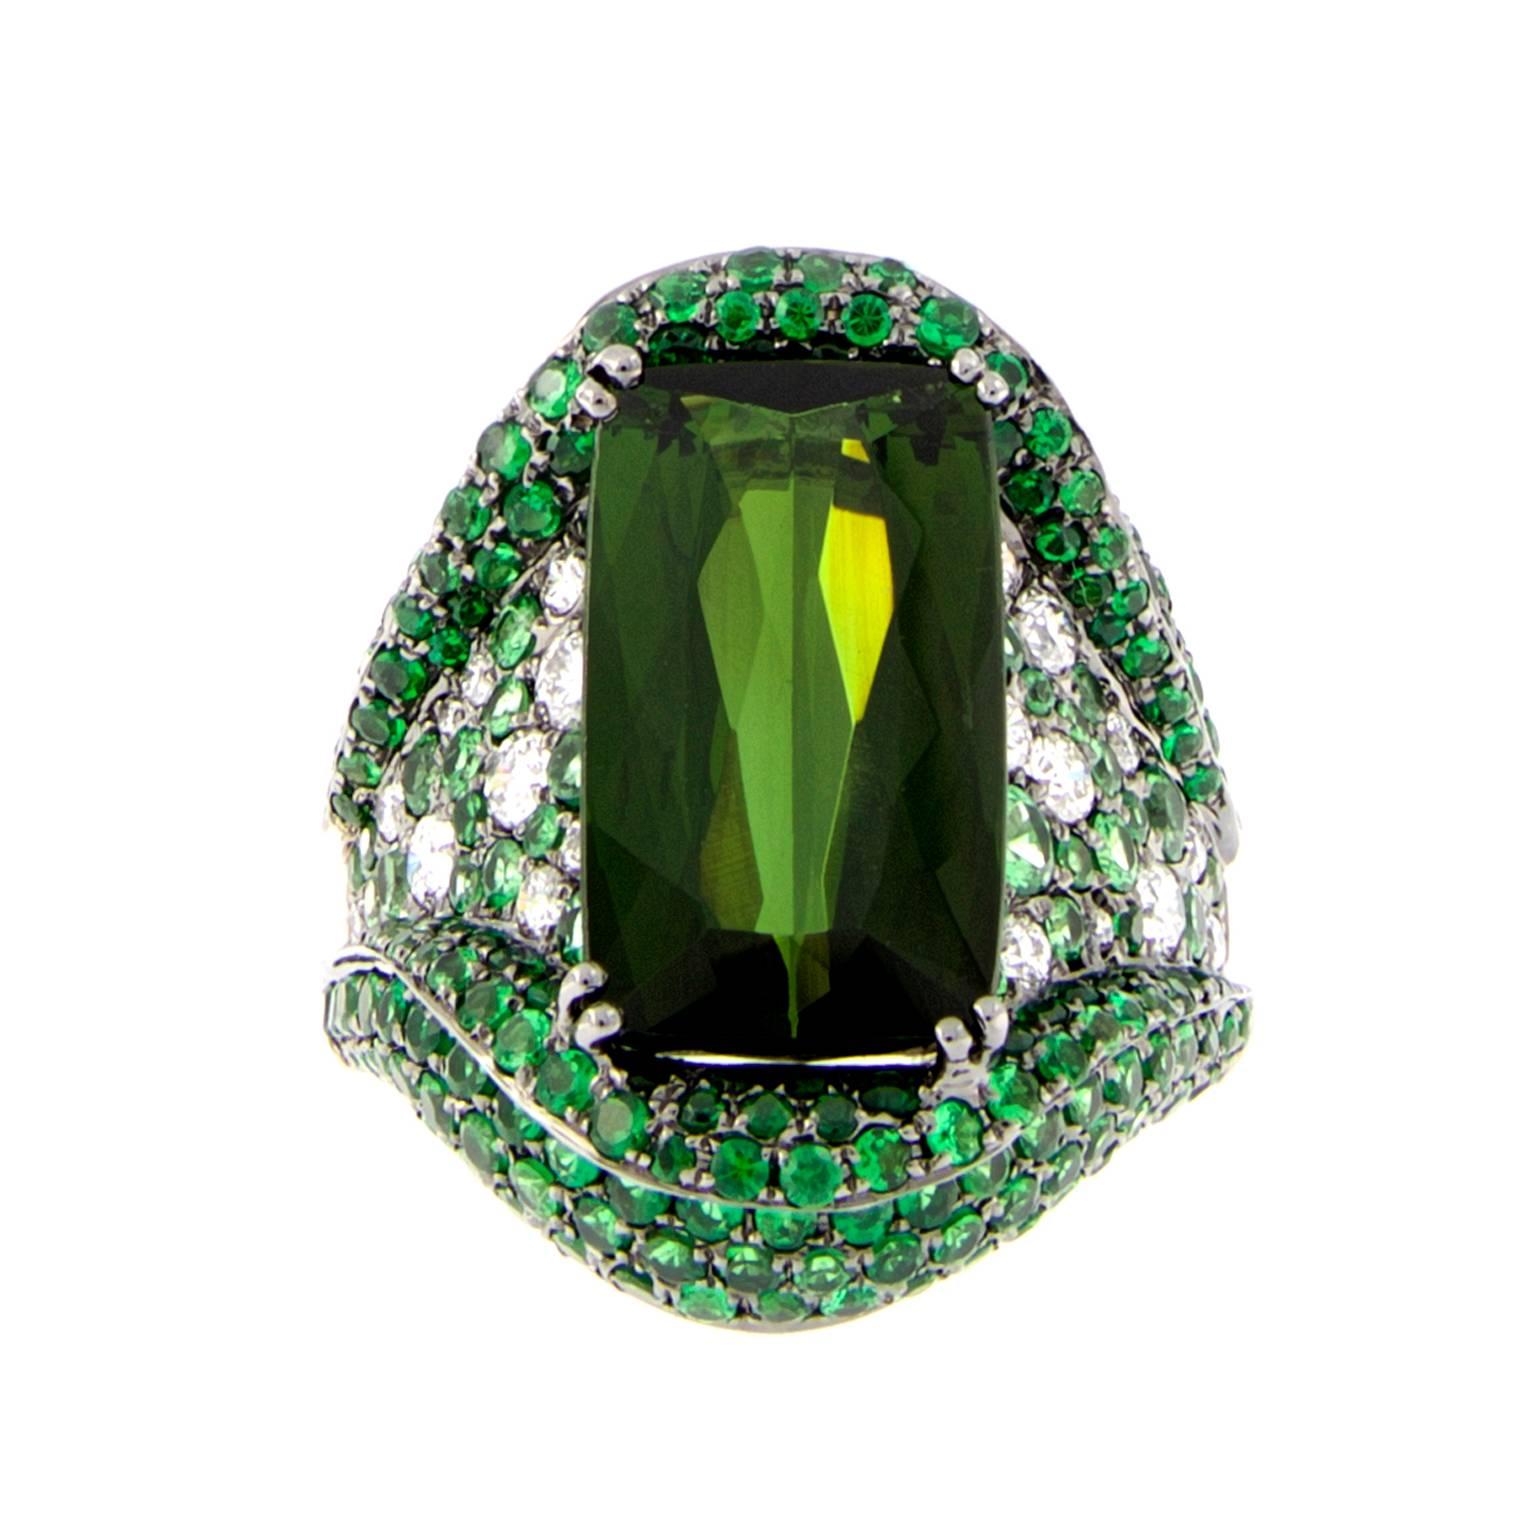 This green tourmaline takes center stage in this glamorous cocktail ring. Ring is crafted in 18k white gold and tourmaline is accented by curved rows of garnets and white diamonds. Weighs 10.3 grams. Ring Size 7.

Tourmaline 5.67 cttw
Garnet 2.61